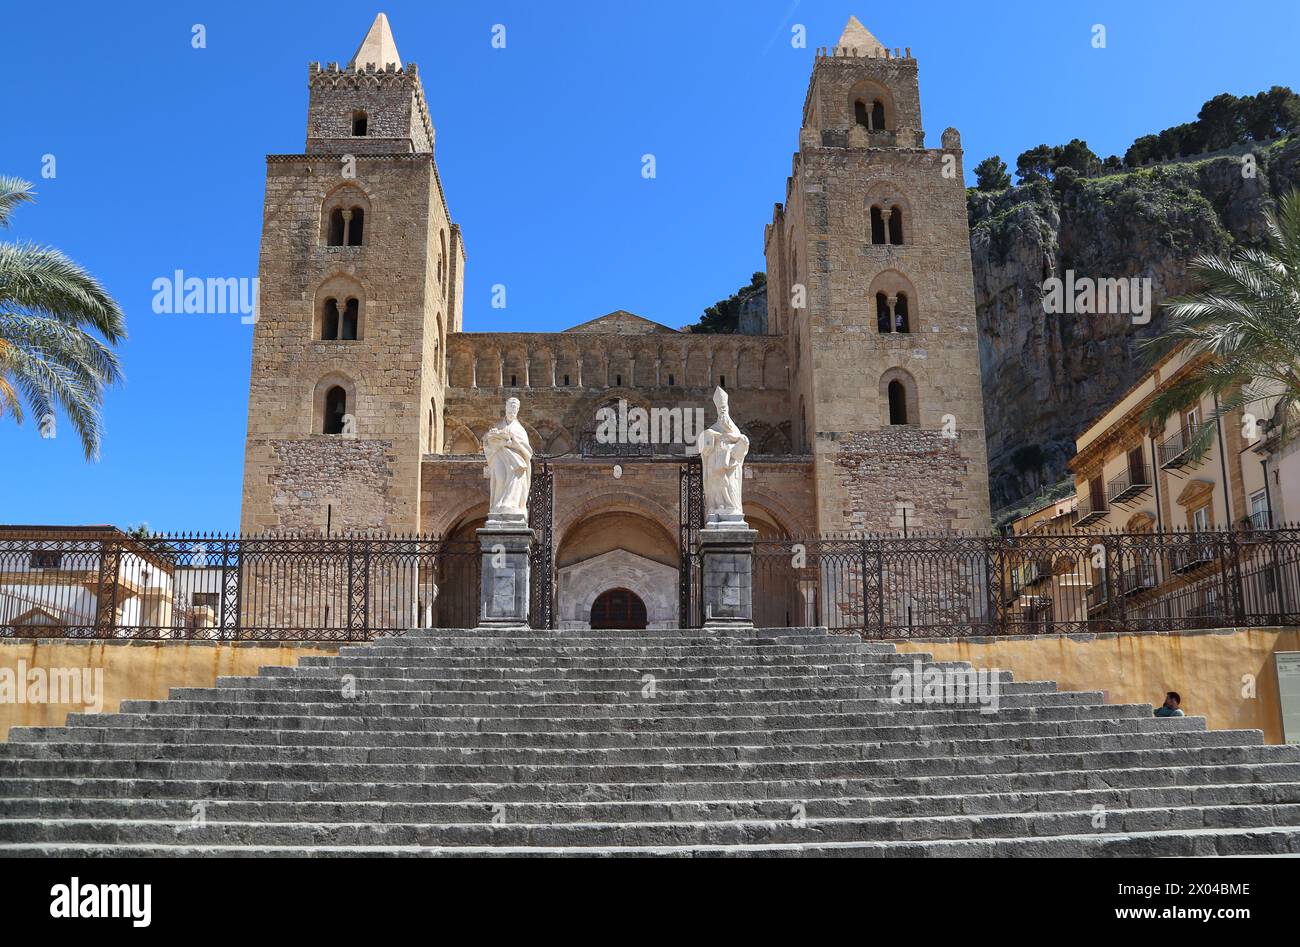 Exterior of the Cefalu Cathedral, a World Heritage Site, in Sicily, Italy Stock Photo